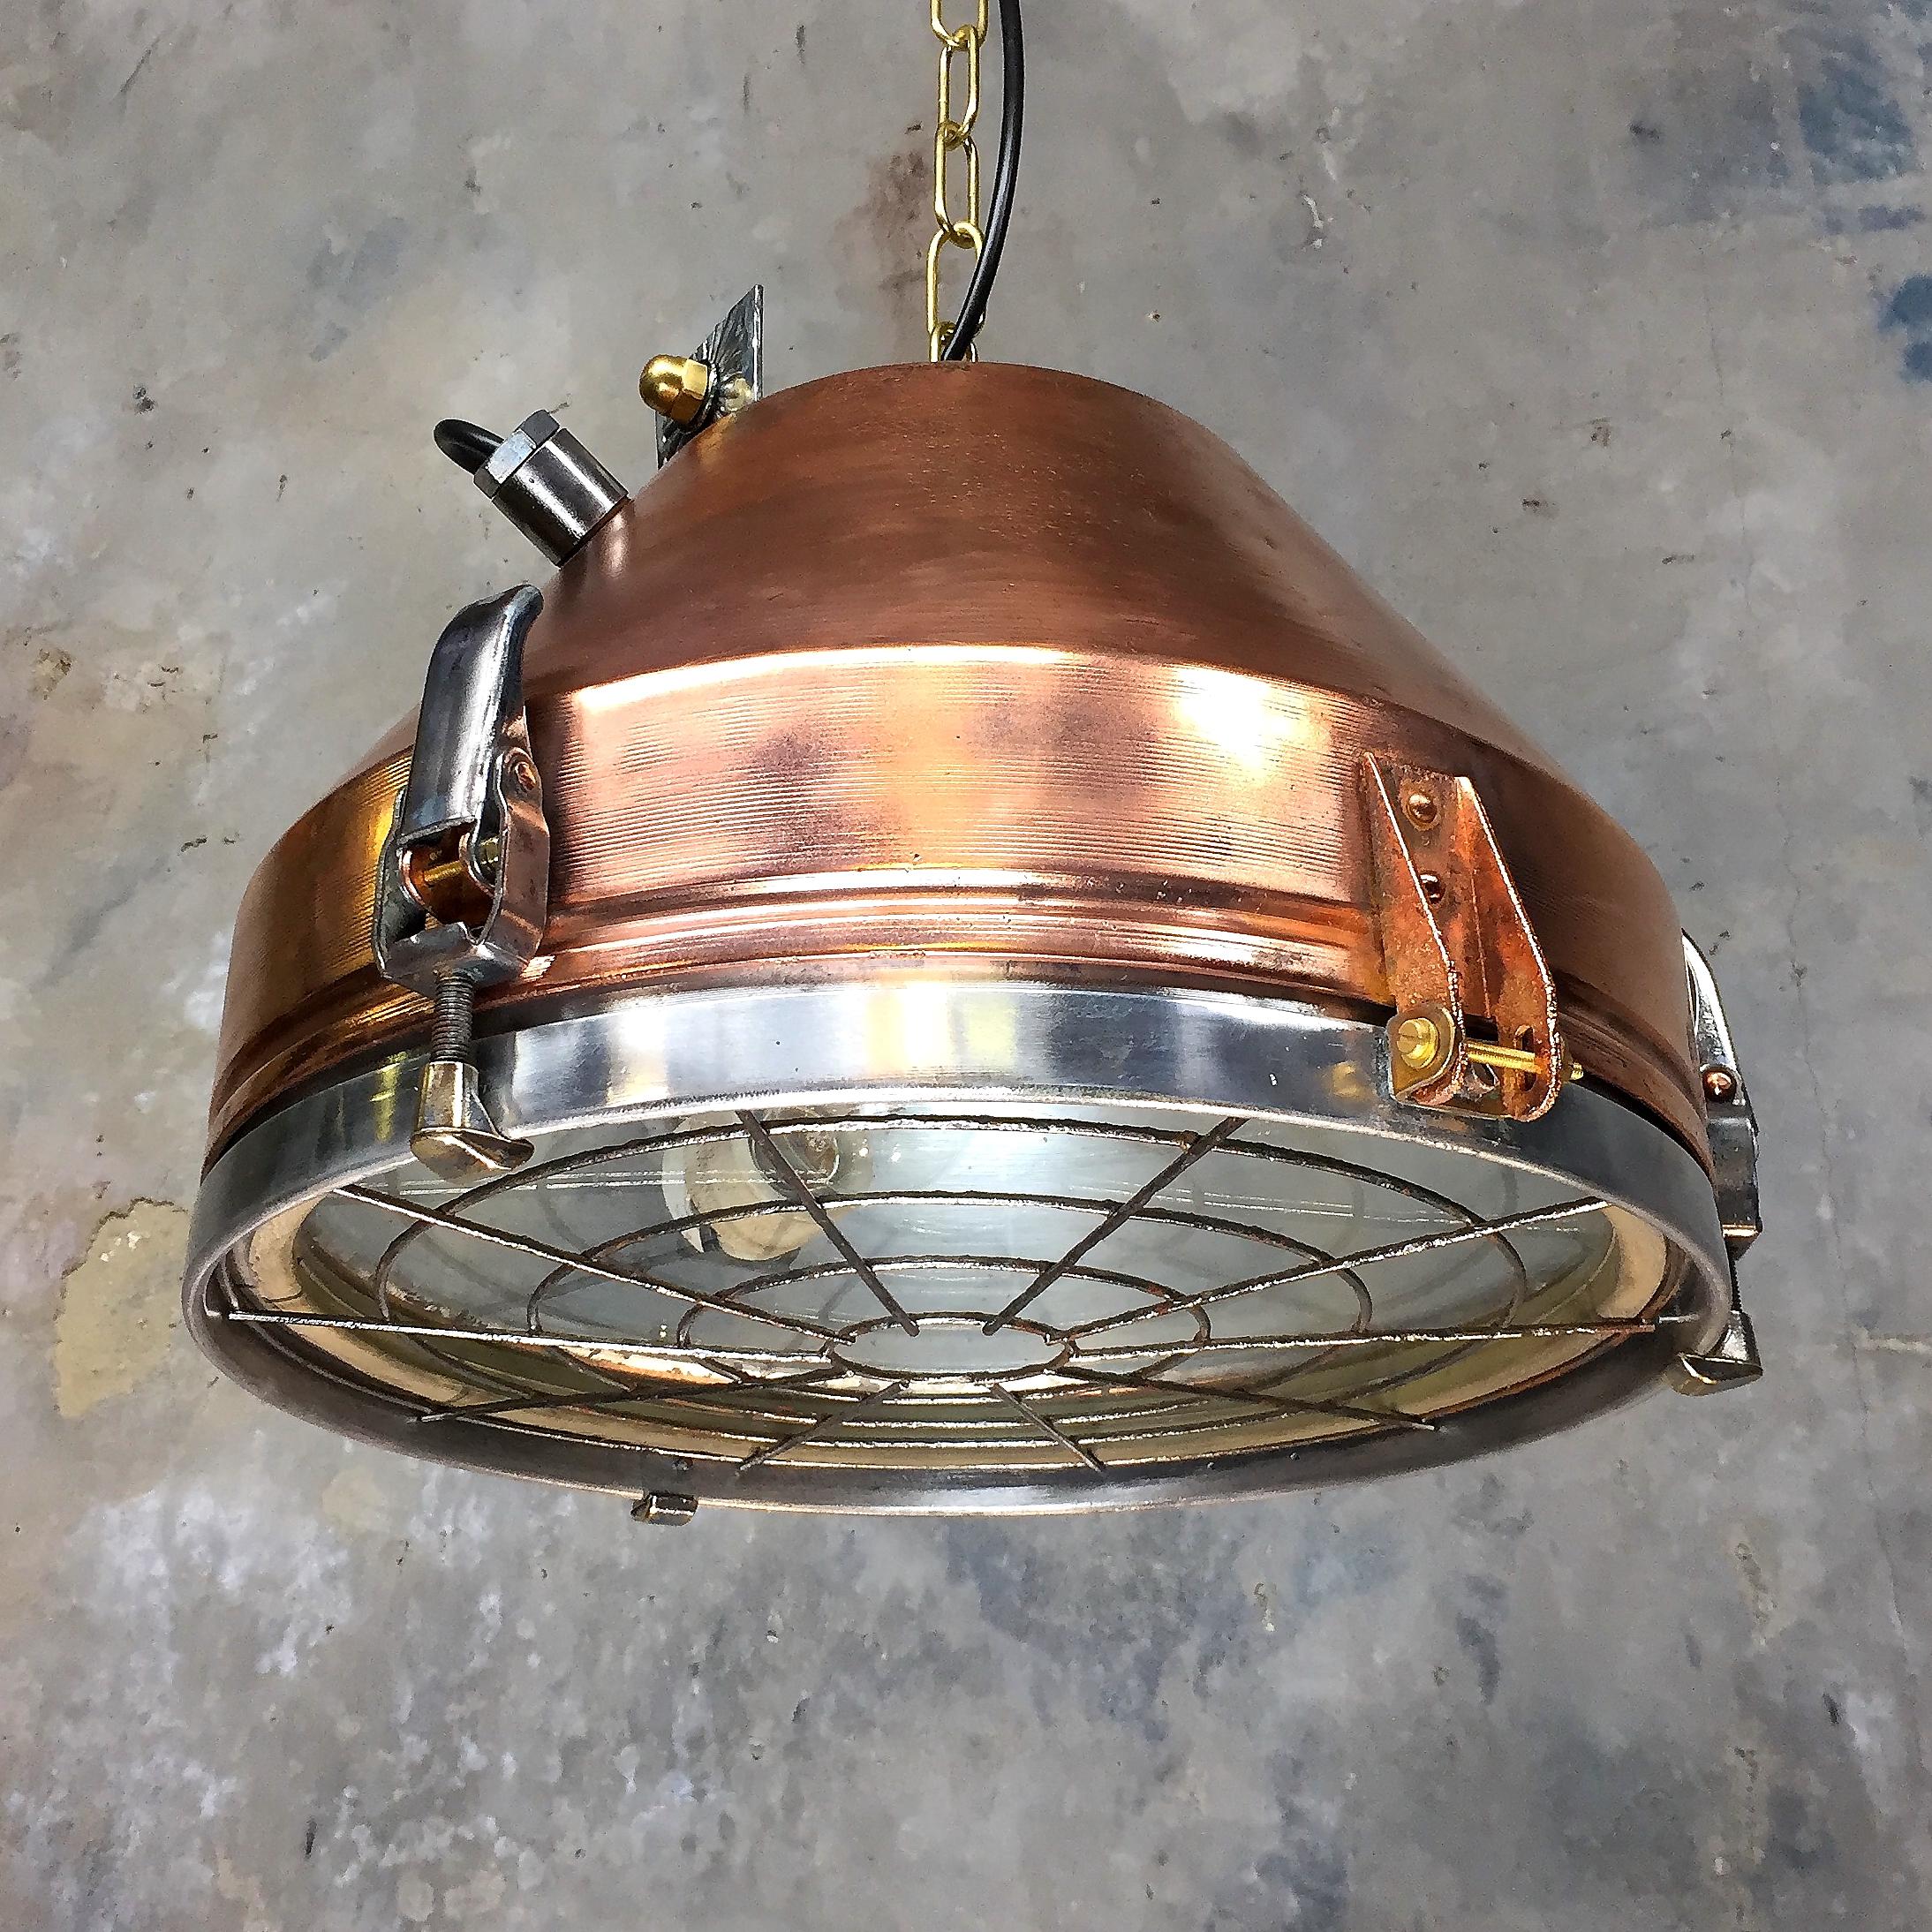 20th Century Industrial Veb Copper & Aluminium Pendant & Bronze Fittings In Excellent Condition For Sale In Leicester, Leicestershire